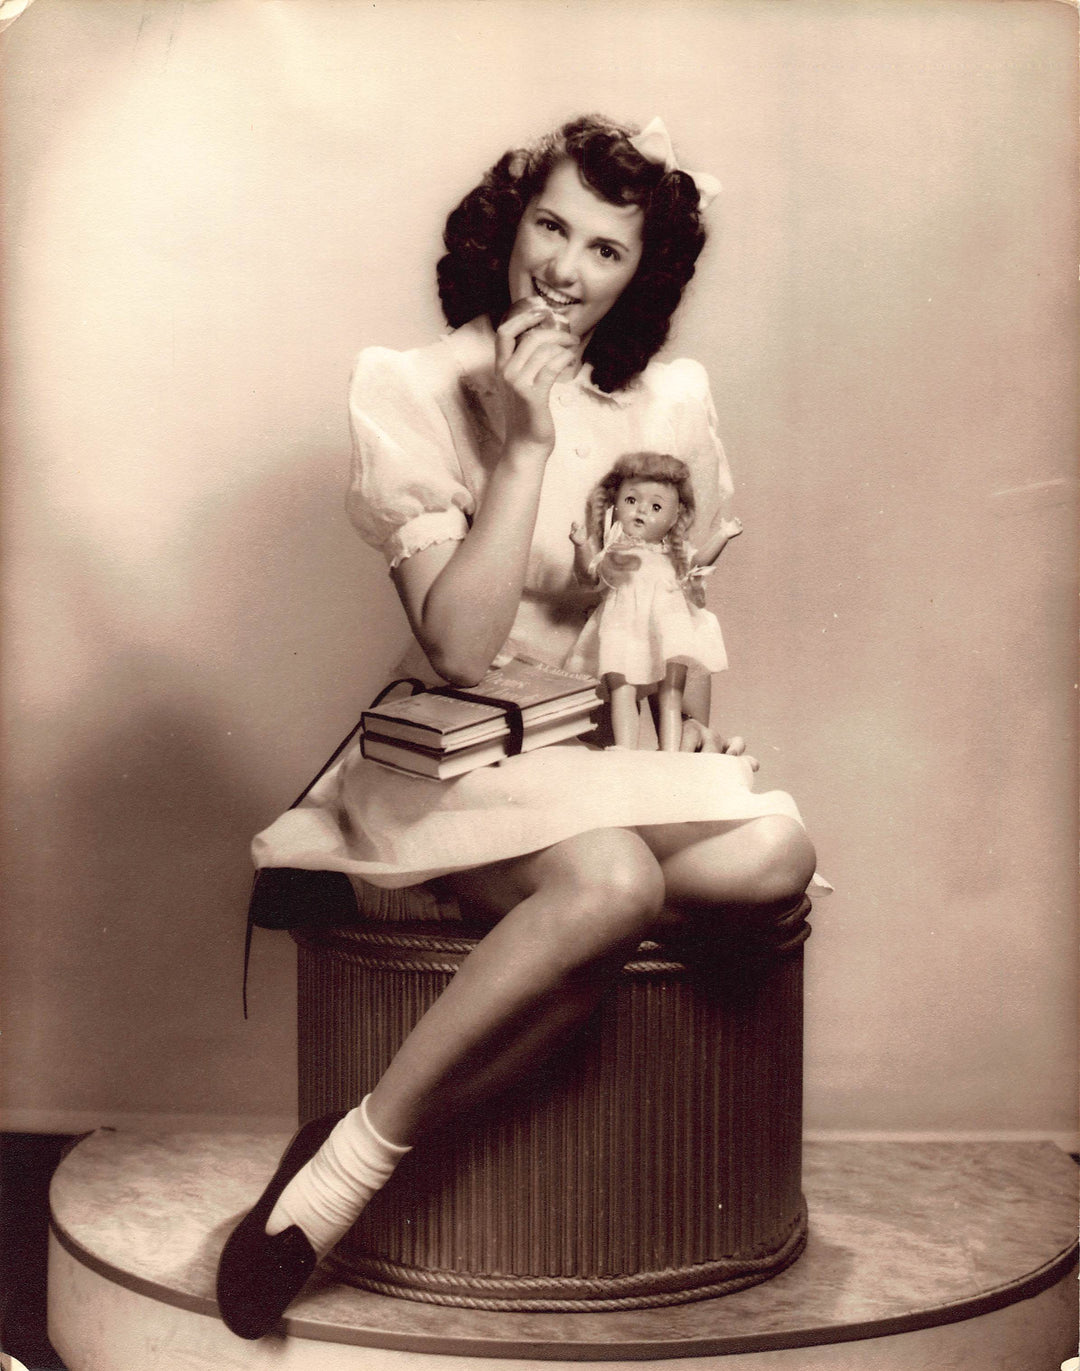 Cute Brunette School Girl with Doll Vintage 1950s Fashion Model Photo